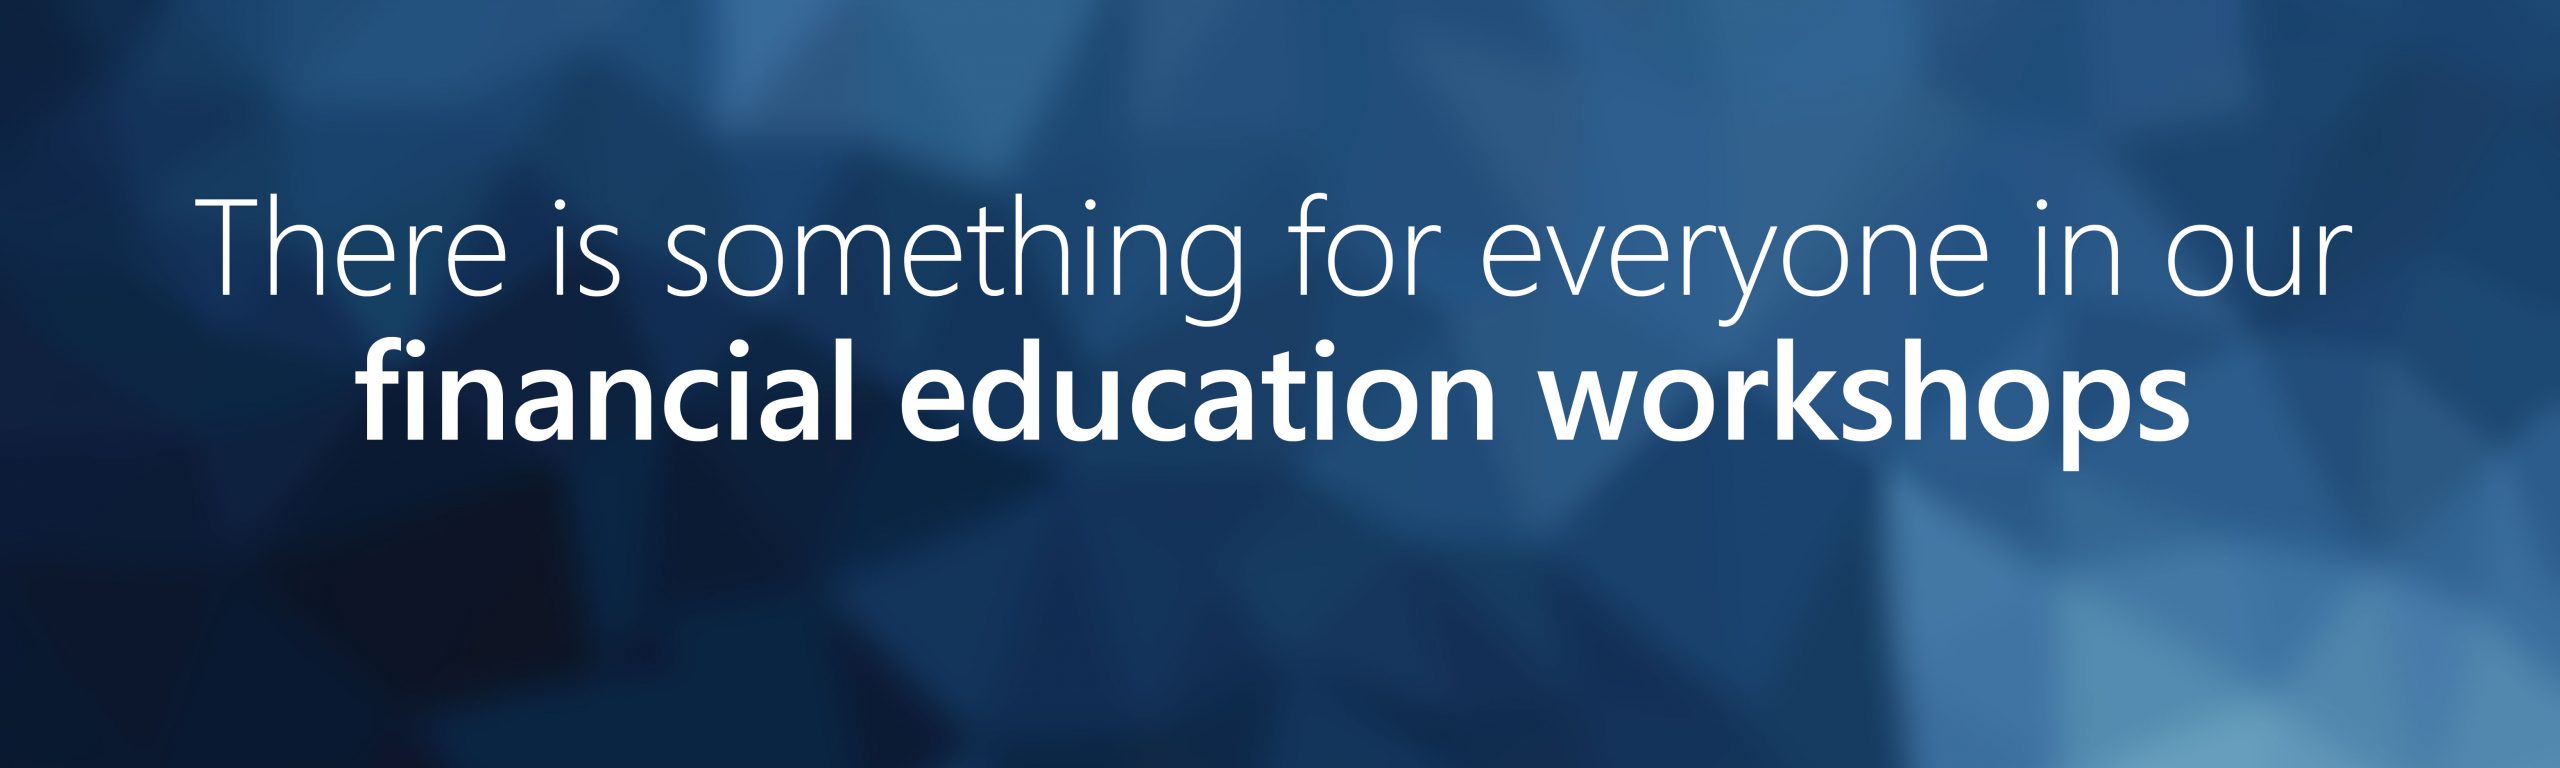 there is something for everyone in our financial education workshops